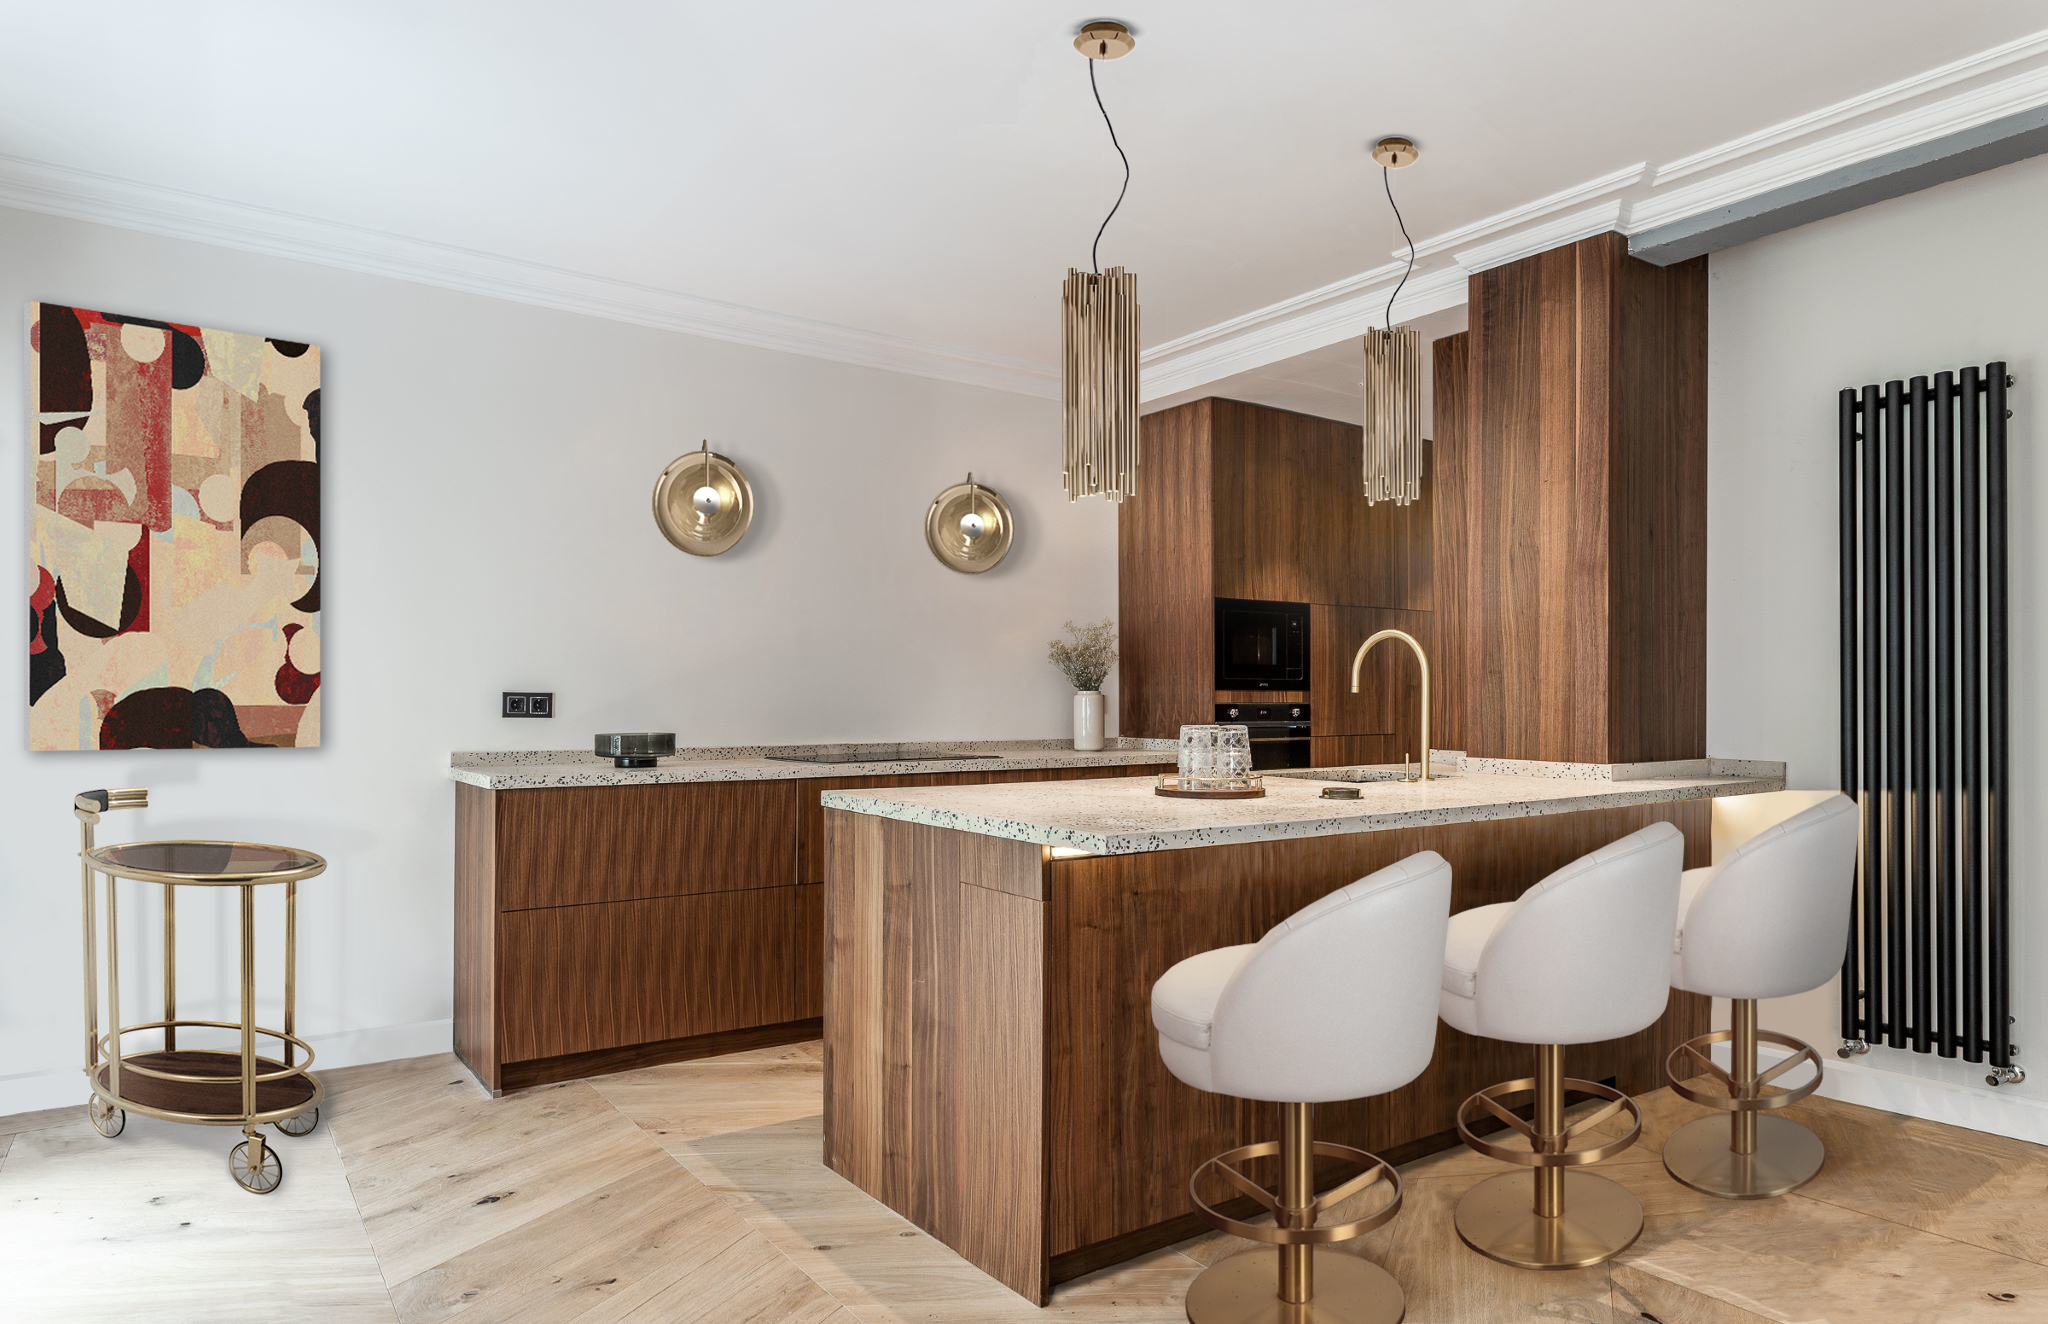 A SOPHISTICATED KITCHEN FULL OF WOODEN DETAILS